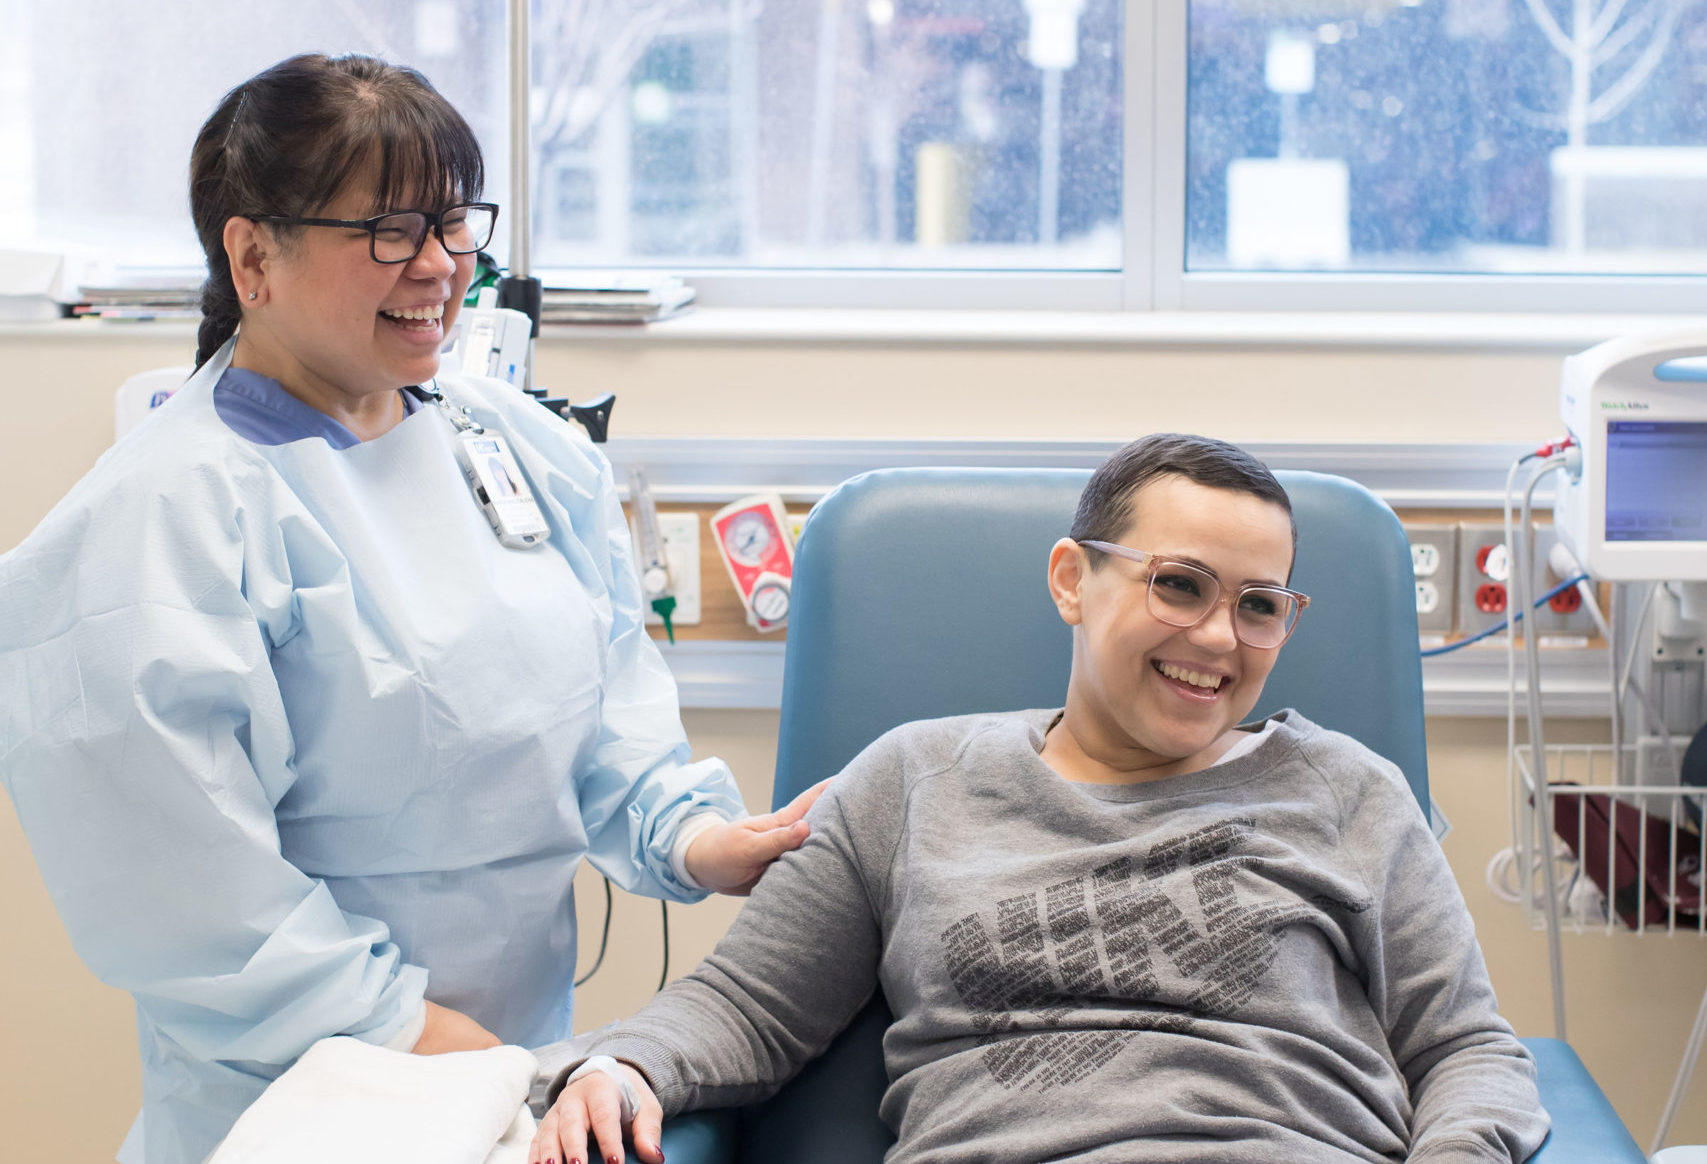 In our Cancer Care Clinic, a nurse and a patient laugh together.